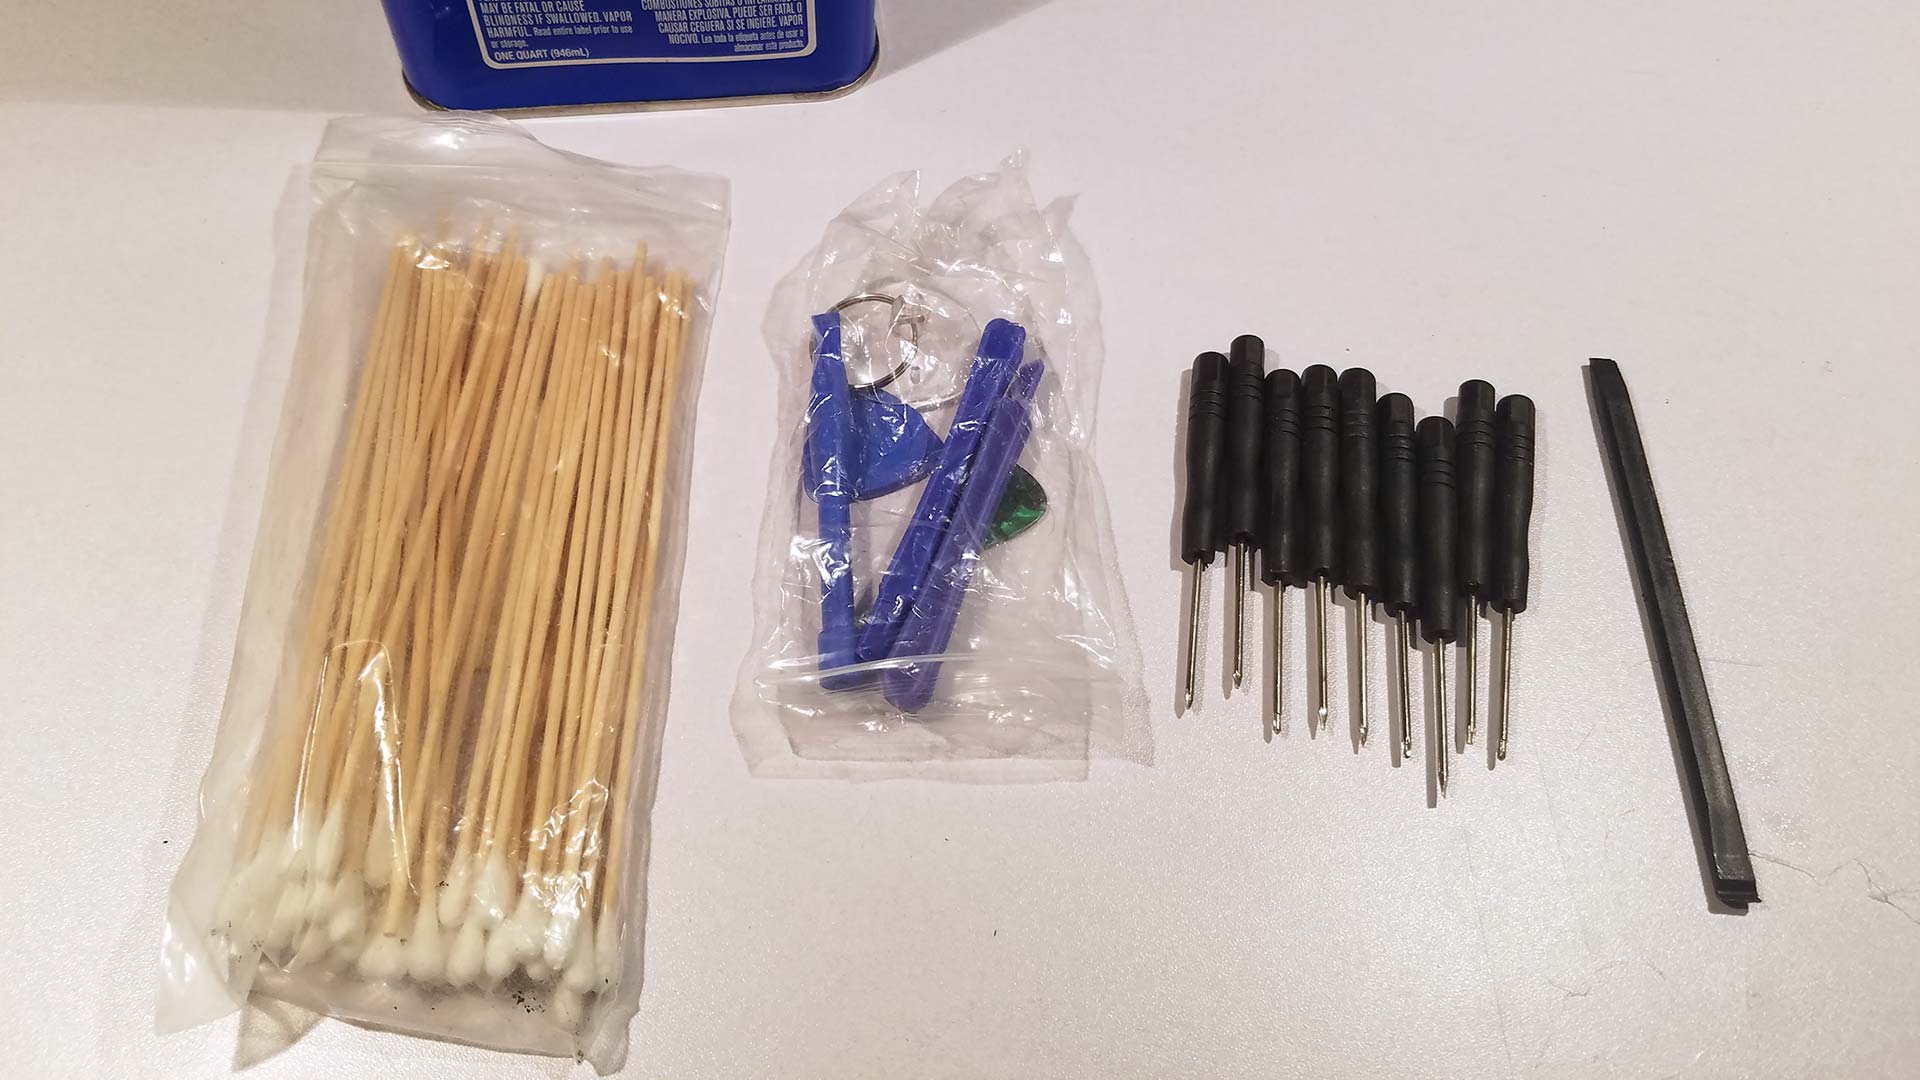 Iphone disassembly tools. and q-tips